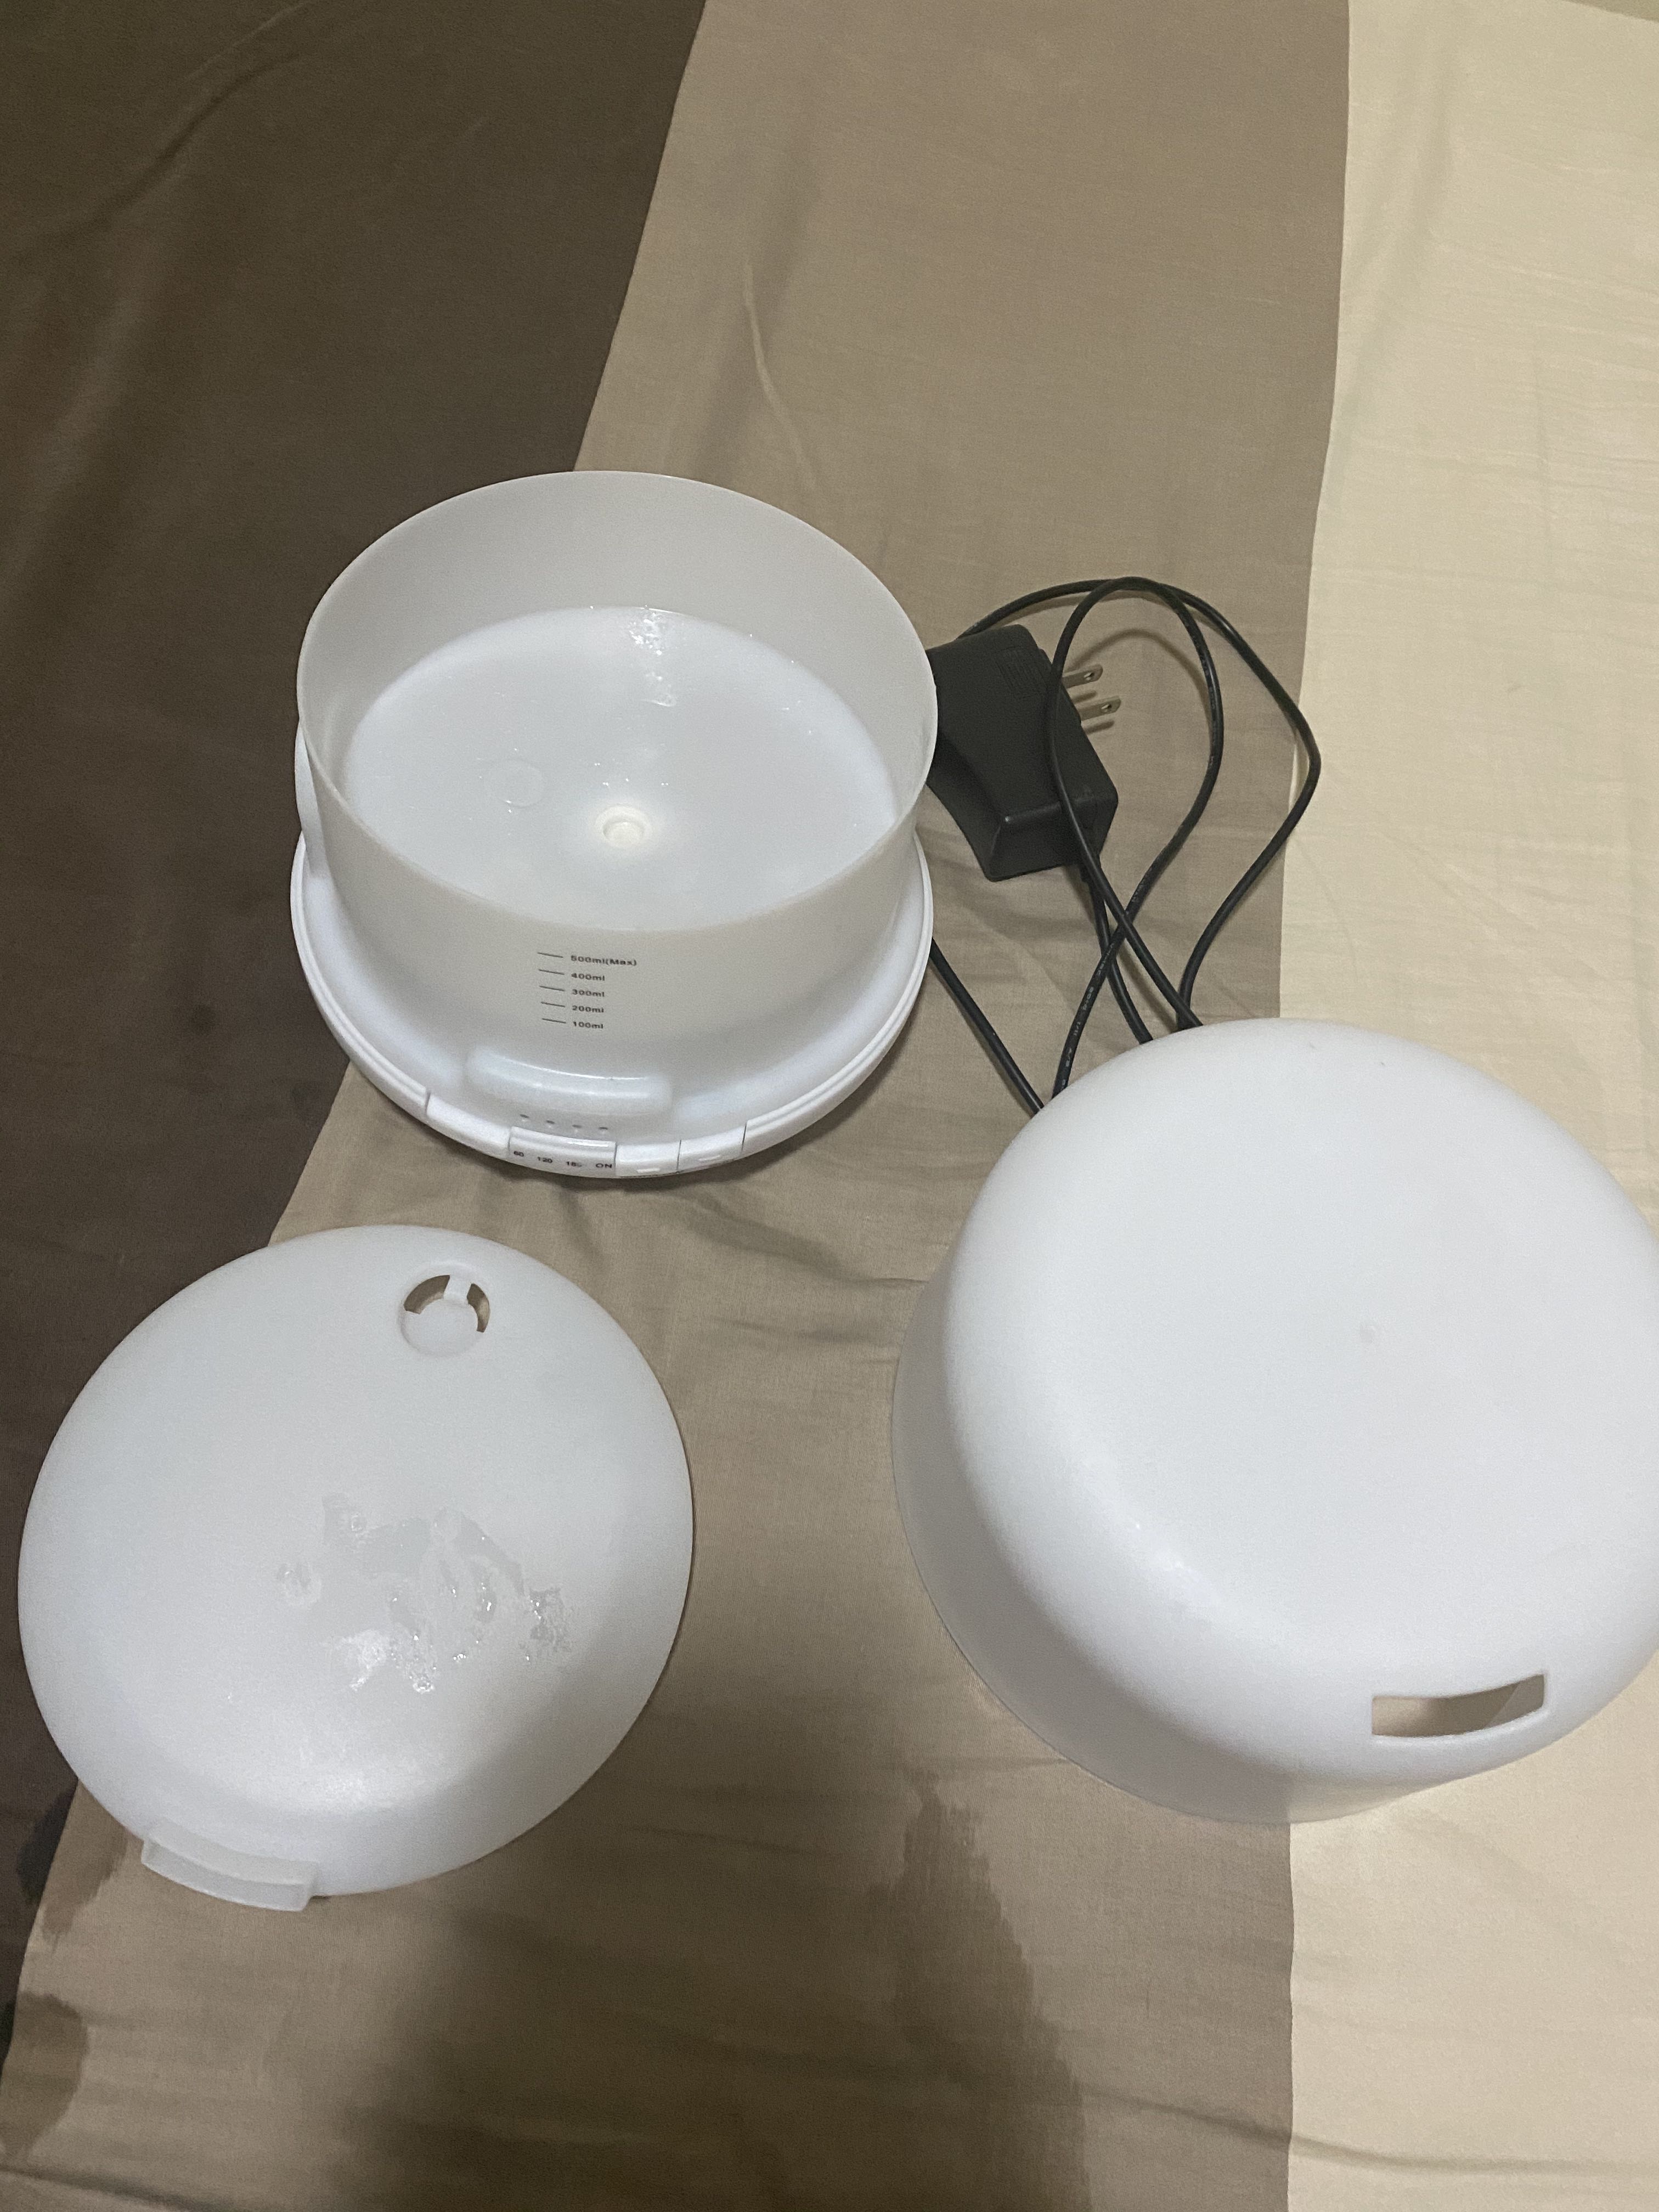 2 in 1 Humidifier and Aroma Diffuser